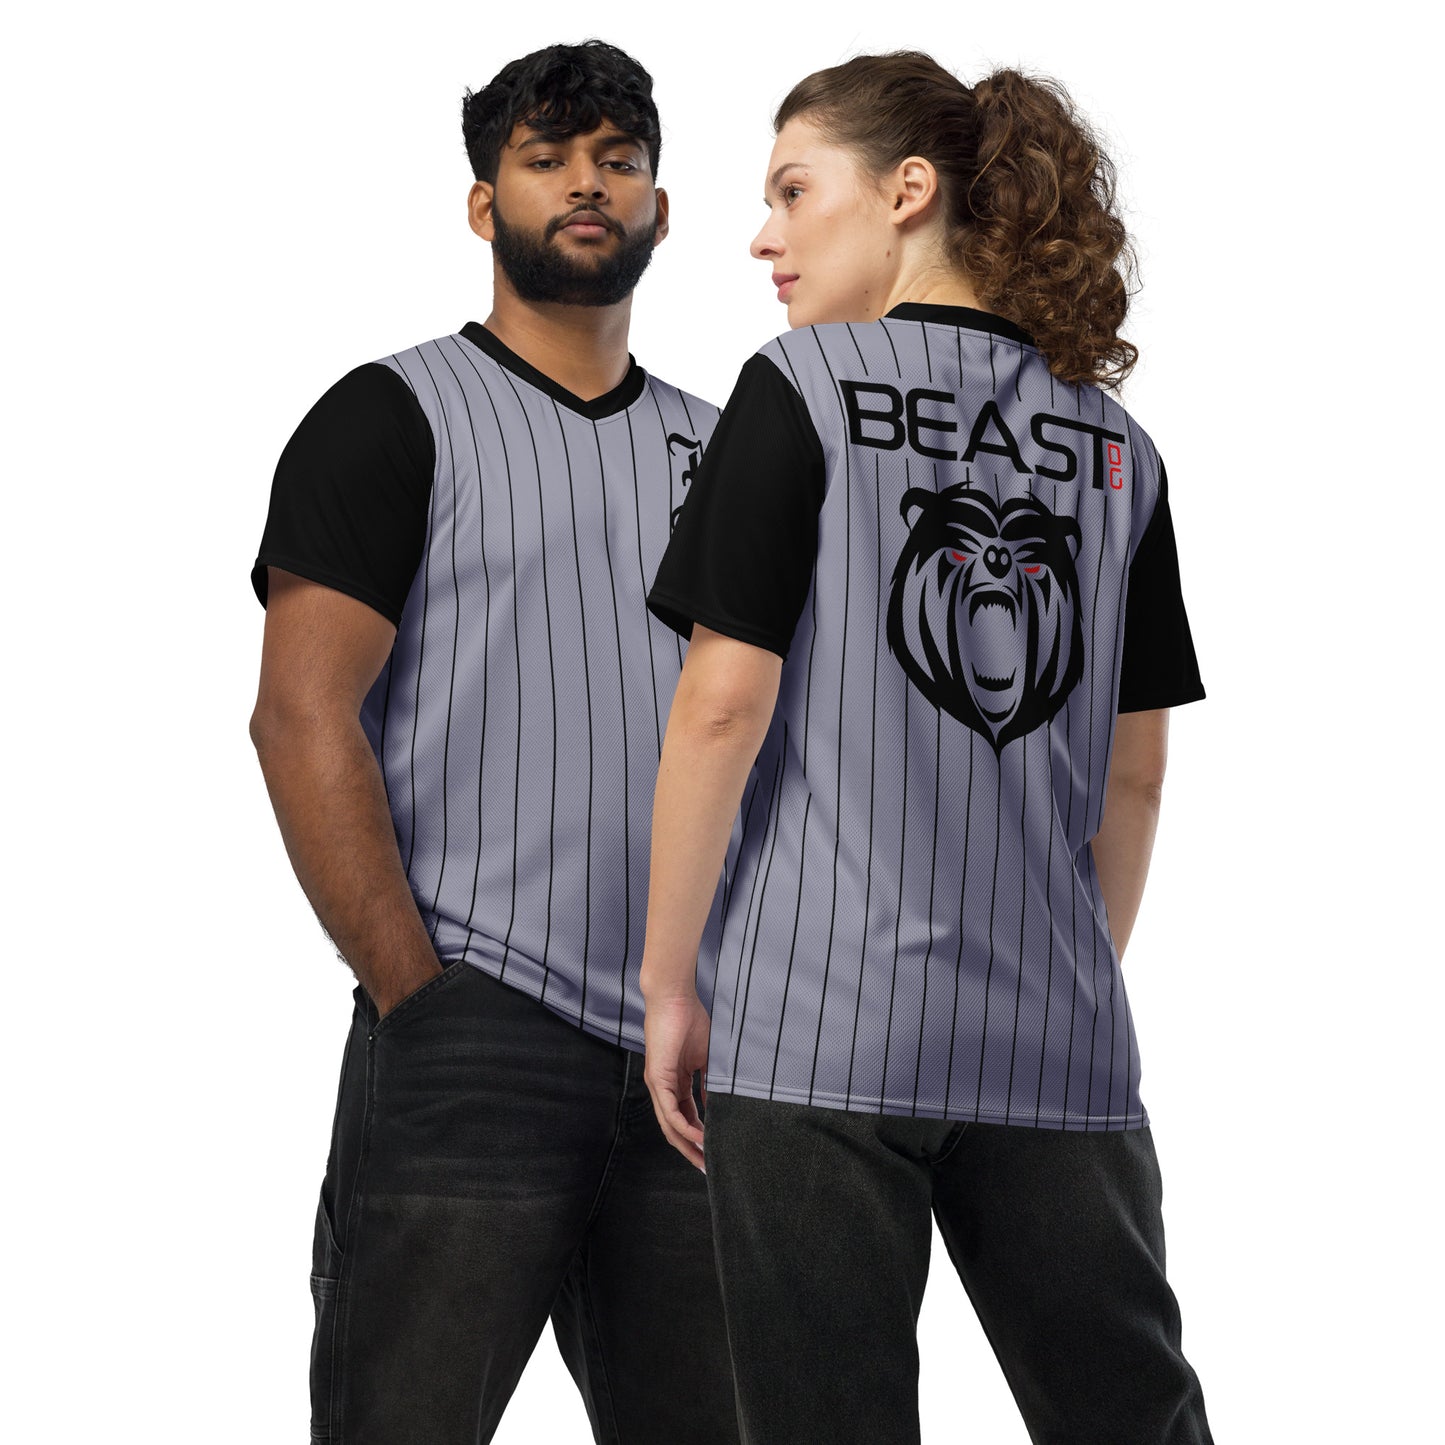 Pinstripes - Holt Whitted Signature Jersey